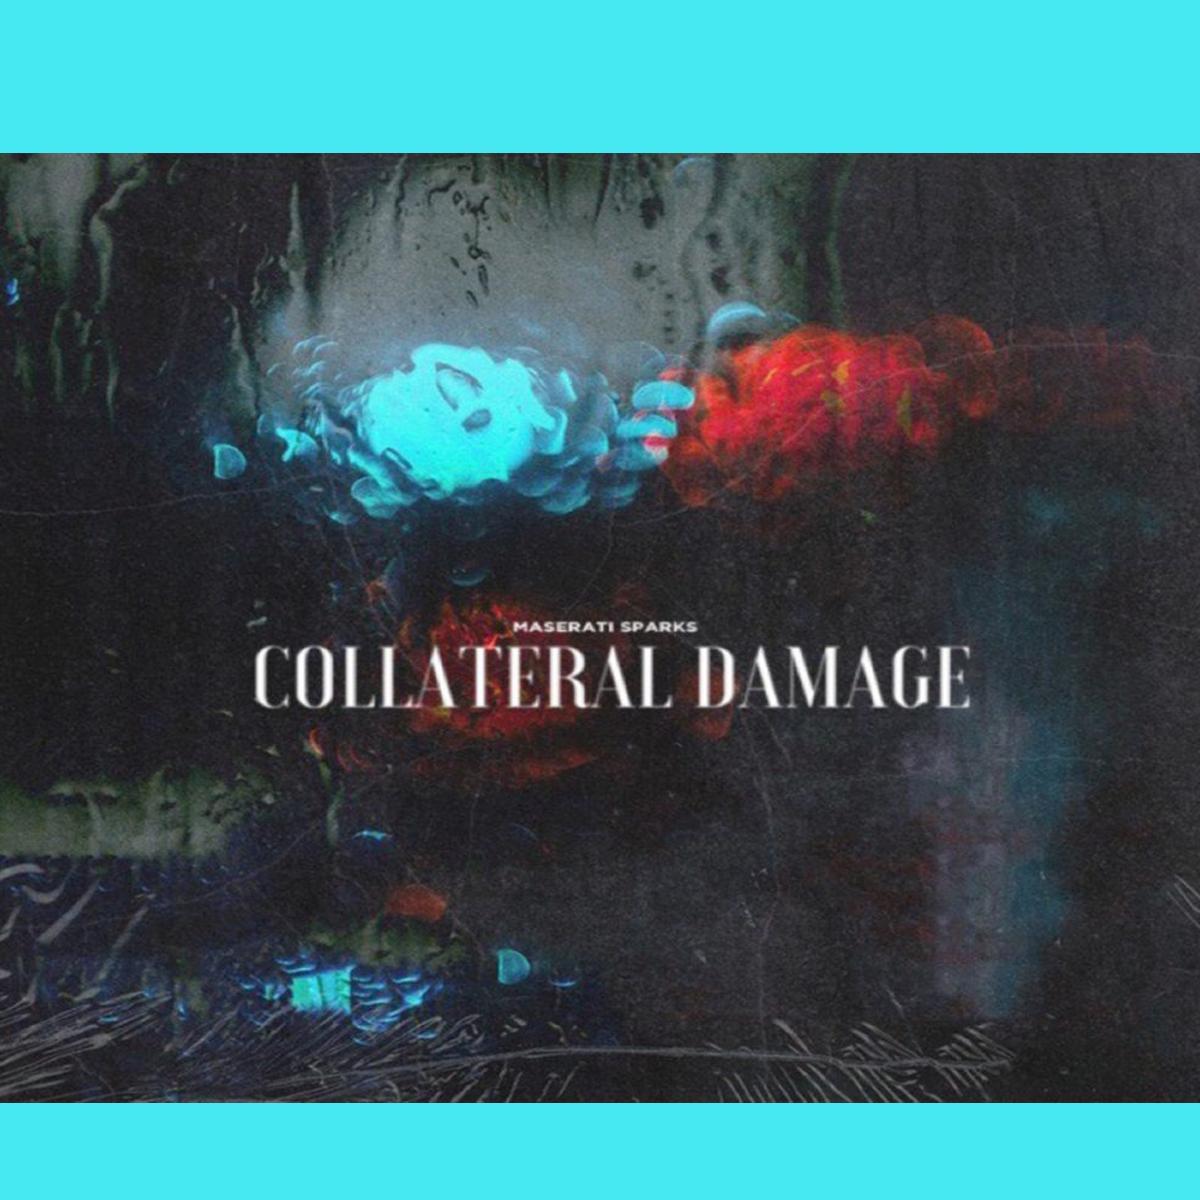 Cover of Collateral Damage Omnisphere Bank